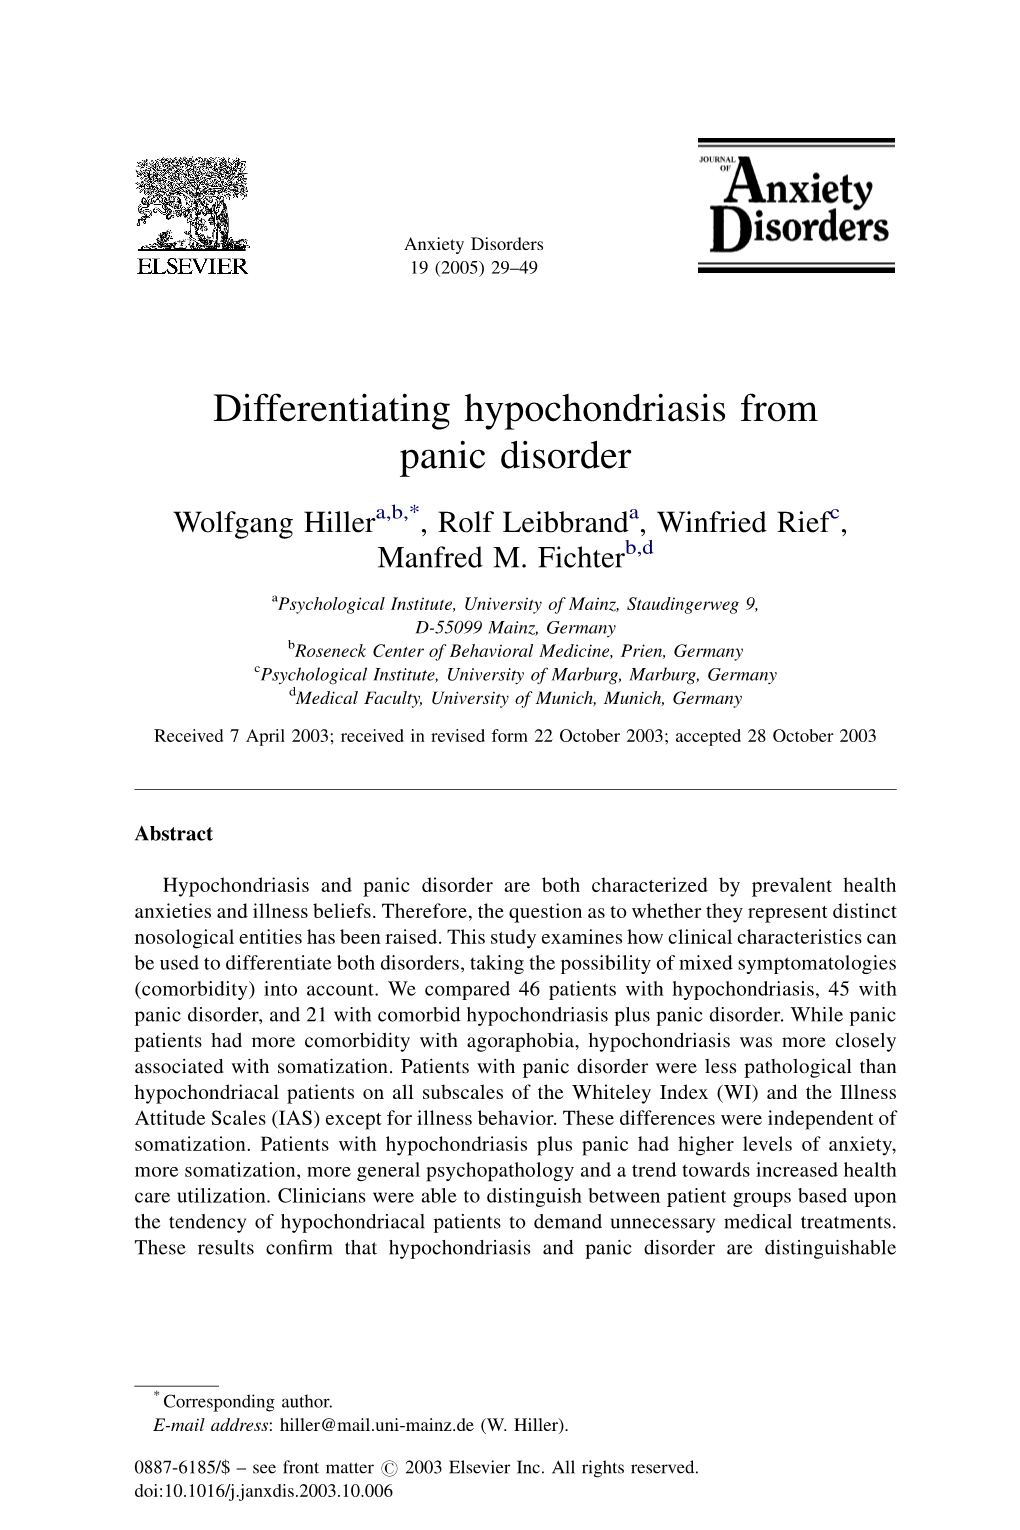 Differentiating Hypochondriasis from Panic Disorder